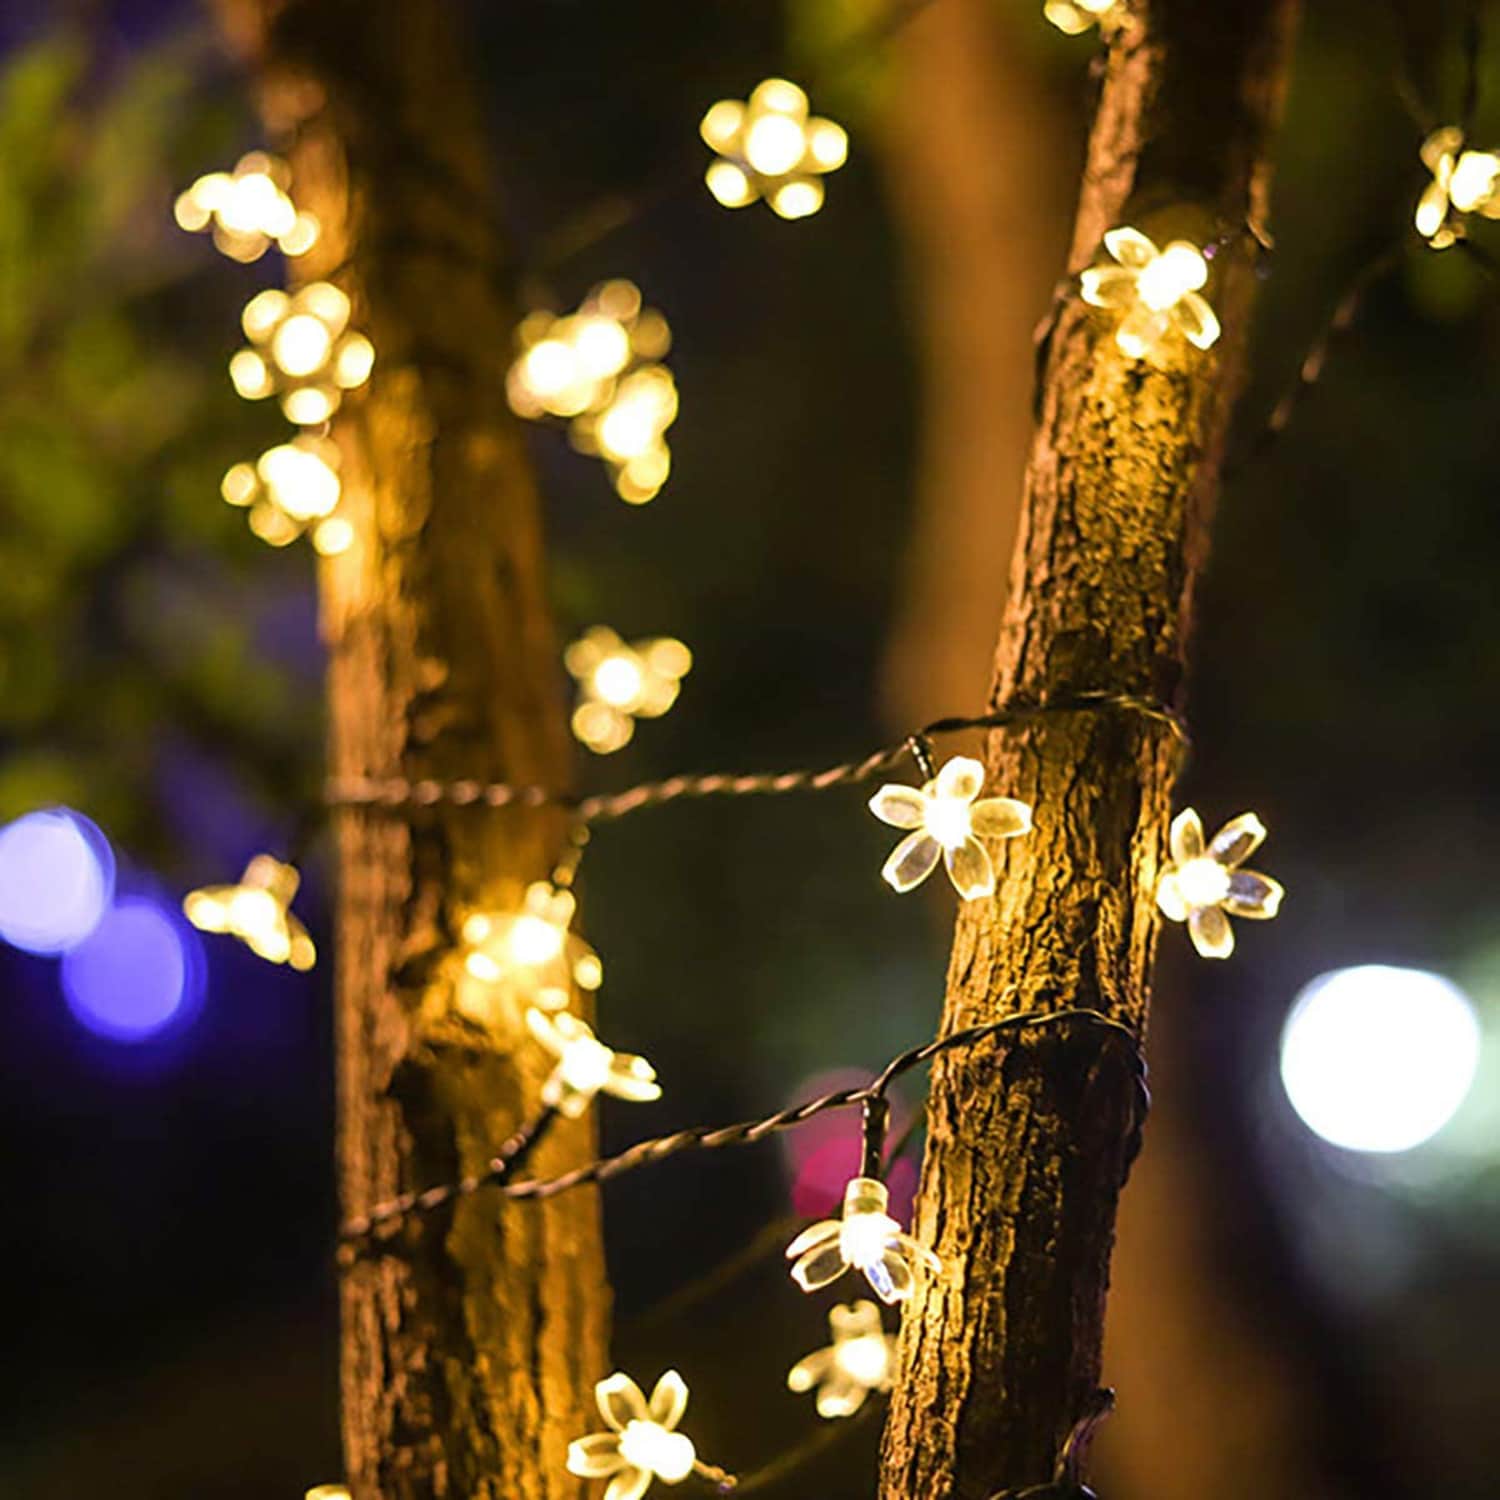 Details about   50LED Blossom Flower Solar Fairy String Lights Outdoor Garden Wedding Party Xmas 